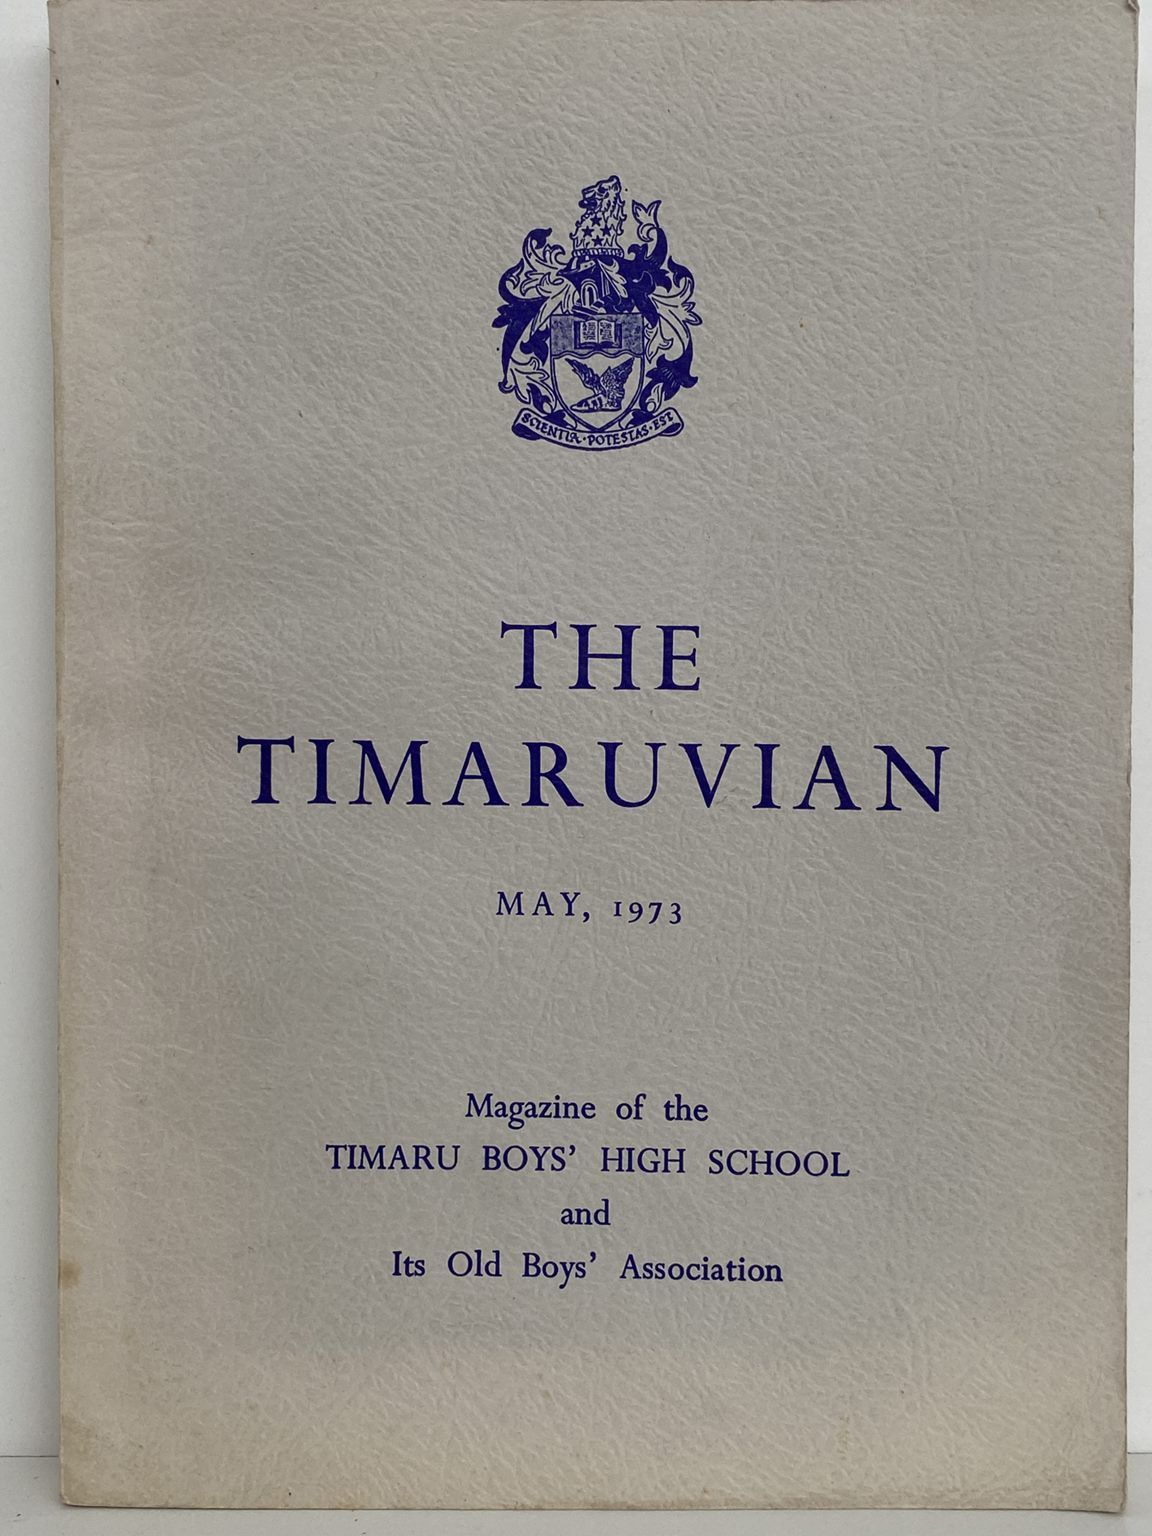 THE TIMARUVIAN: Magazine of the Timaru Boys' High School and its Old Boys' Association 1973